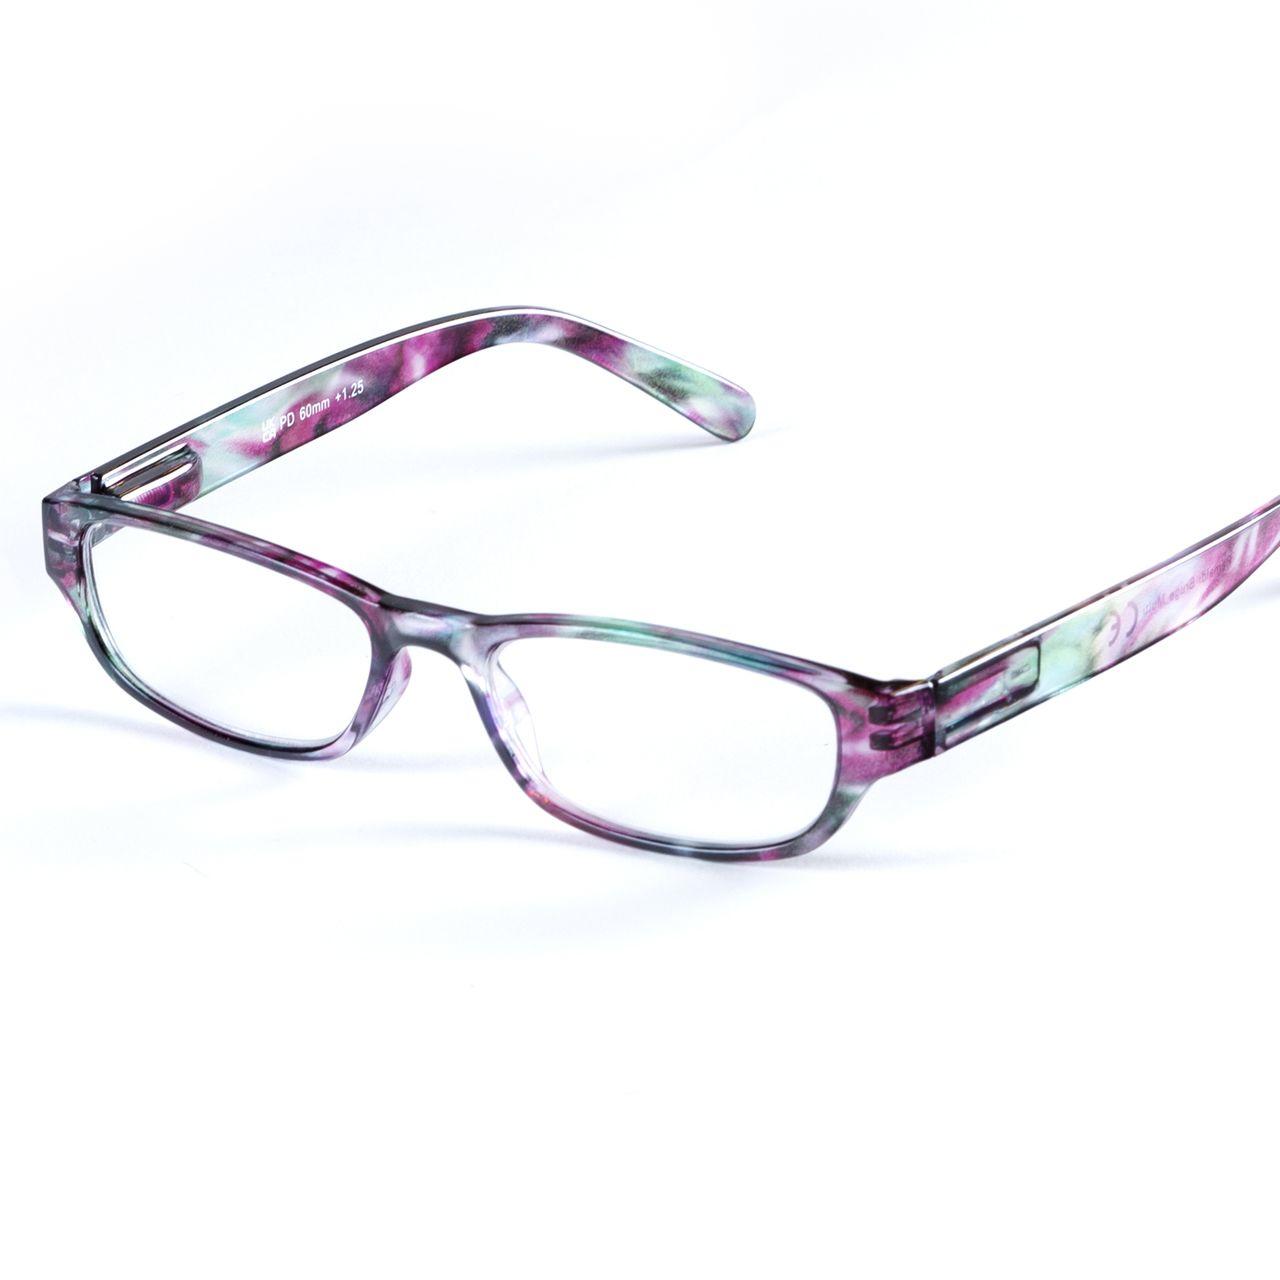 Reading Glasses In Tones of Misty Heather-2